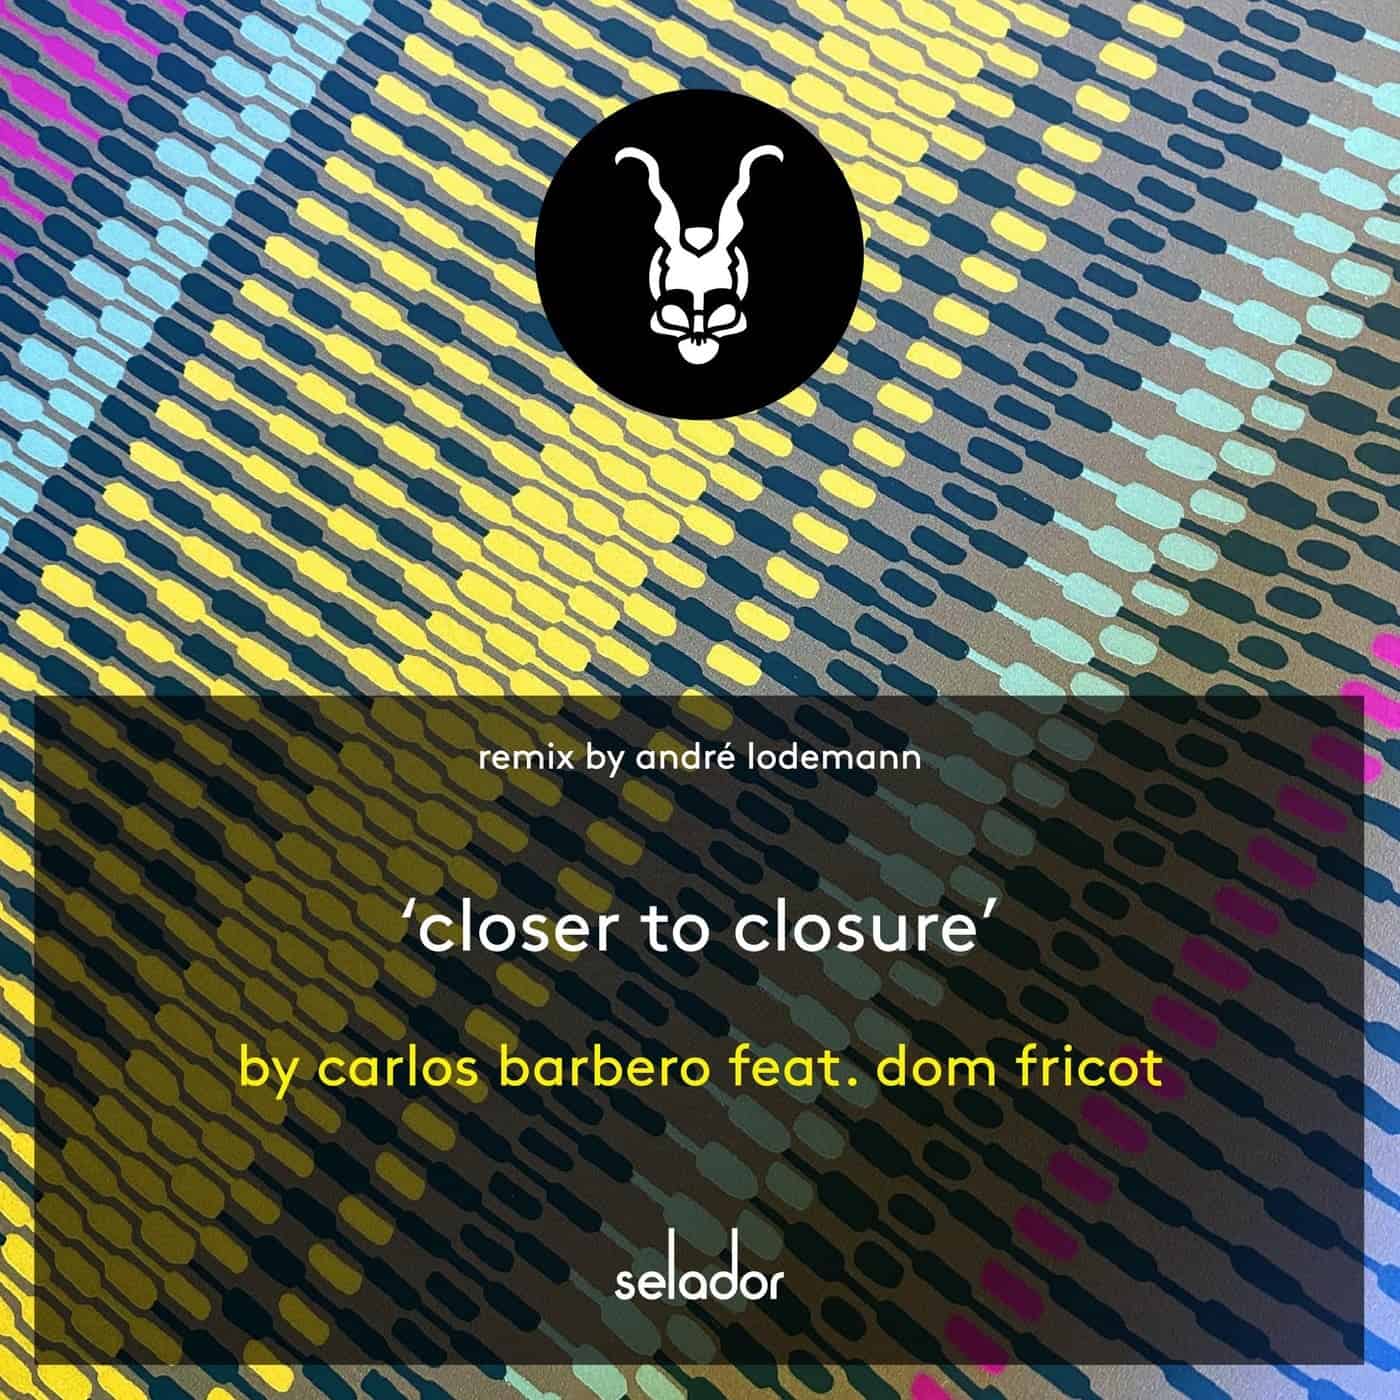 image cover: Carlos Barbero, Dom Fricot - Closer To Closure (Andre Lodemann Remix) / SEL151B